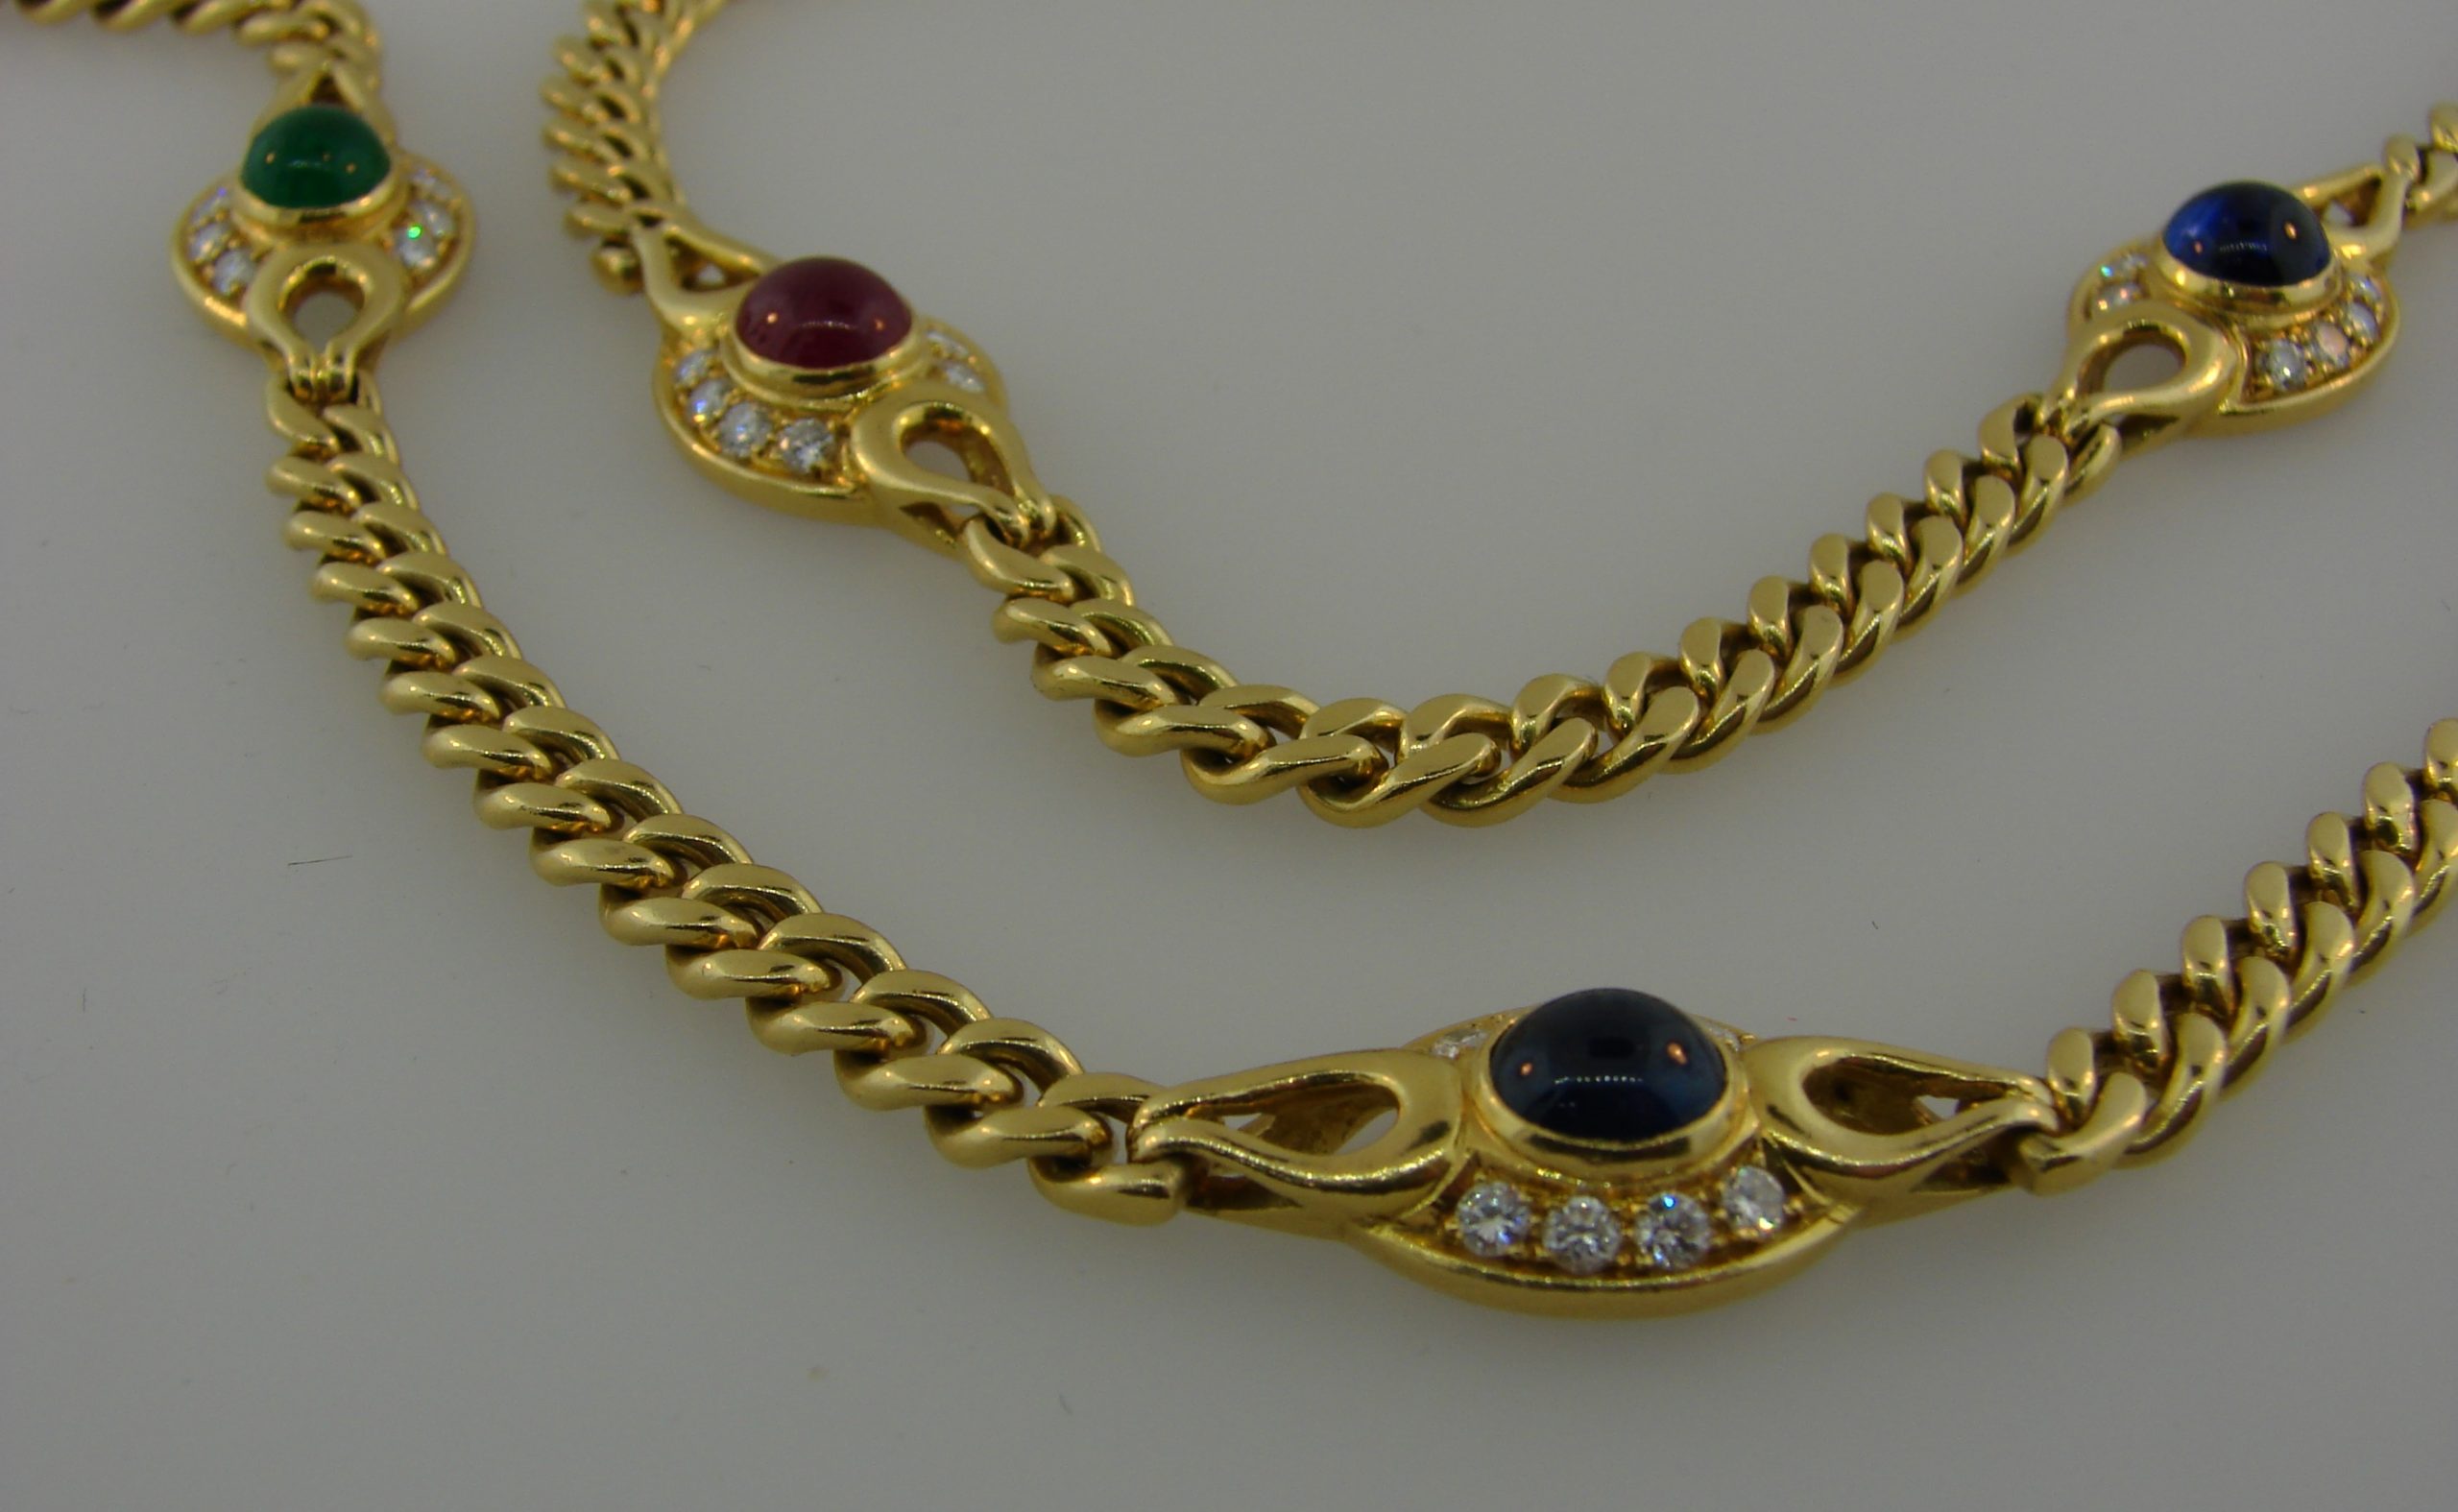 FRED PARIS 1970 RARE CHOKER NECKLACE IN 18 KT GOLD WITH HERCULES KNOT –  Treasure Fine Jewelry